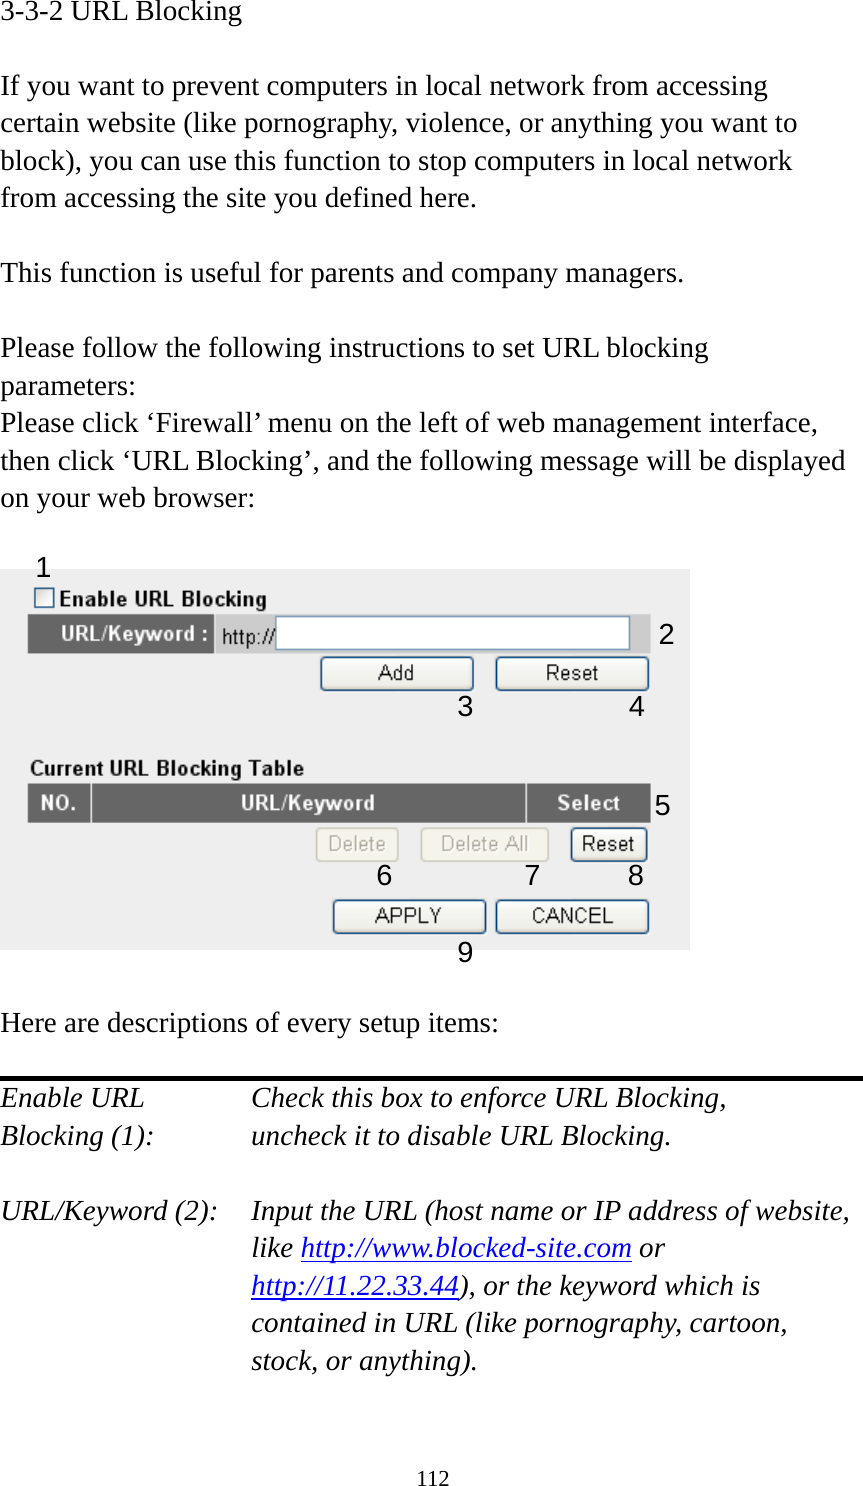 112 3-3-2 URL Blocking  If you want to prevent computers in local network from accessing certain website (like pornography, violence, or anything you want to block), you can use this function to stop computers in local network from accessing the site you defined here.  This function is useful for parents and company managers.  Please follow the following instructions to set URL blocking parameters: Please click ‘Firewall’ menu on the left of web management interface, then click ‘URL Blocking’, and the following message will be displayed on your web browser:    Here are descriptions of every setup items:  Enable URL      Check this box to enforce URL Blocking, Blocking (1):      uncheck it to disable URL Blocking.  URL/Keyword (2):    Input the URL (host name or IP address of website, like http://www.blocked-site.com or http://11.22.33.44), or the keyword which is contained in URL (like pornography, cartoon, stock, or anything).  2 3 4 5 6 7 8 9 1 